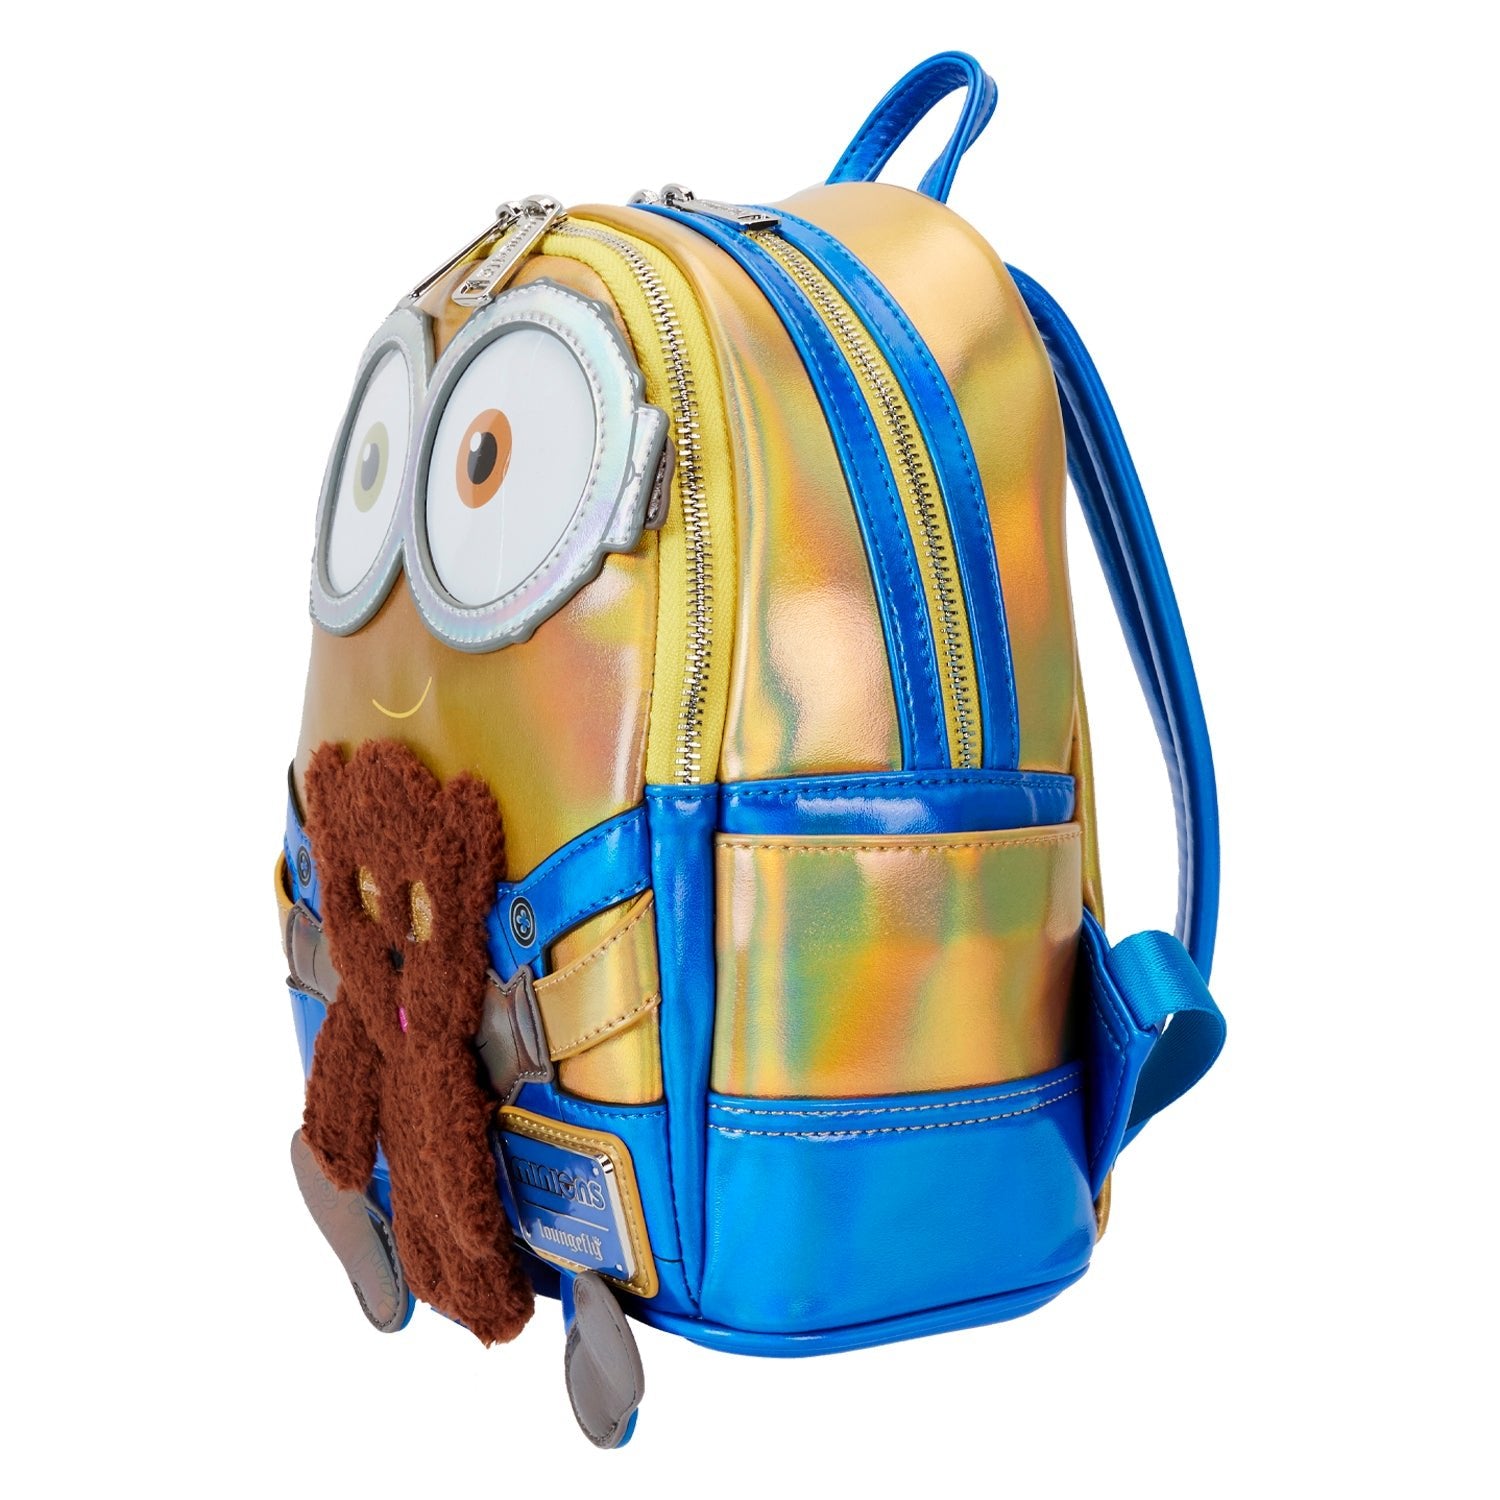 Loungefly x Despicable Me Iridescent Bob Cosplay Mini Backpack - GeekCore